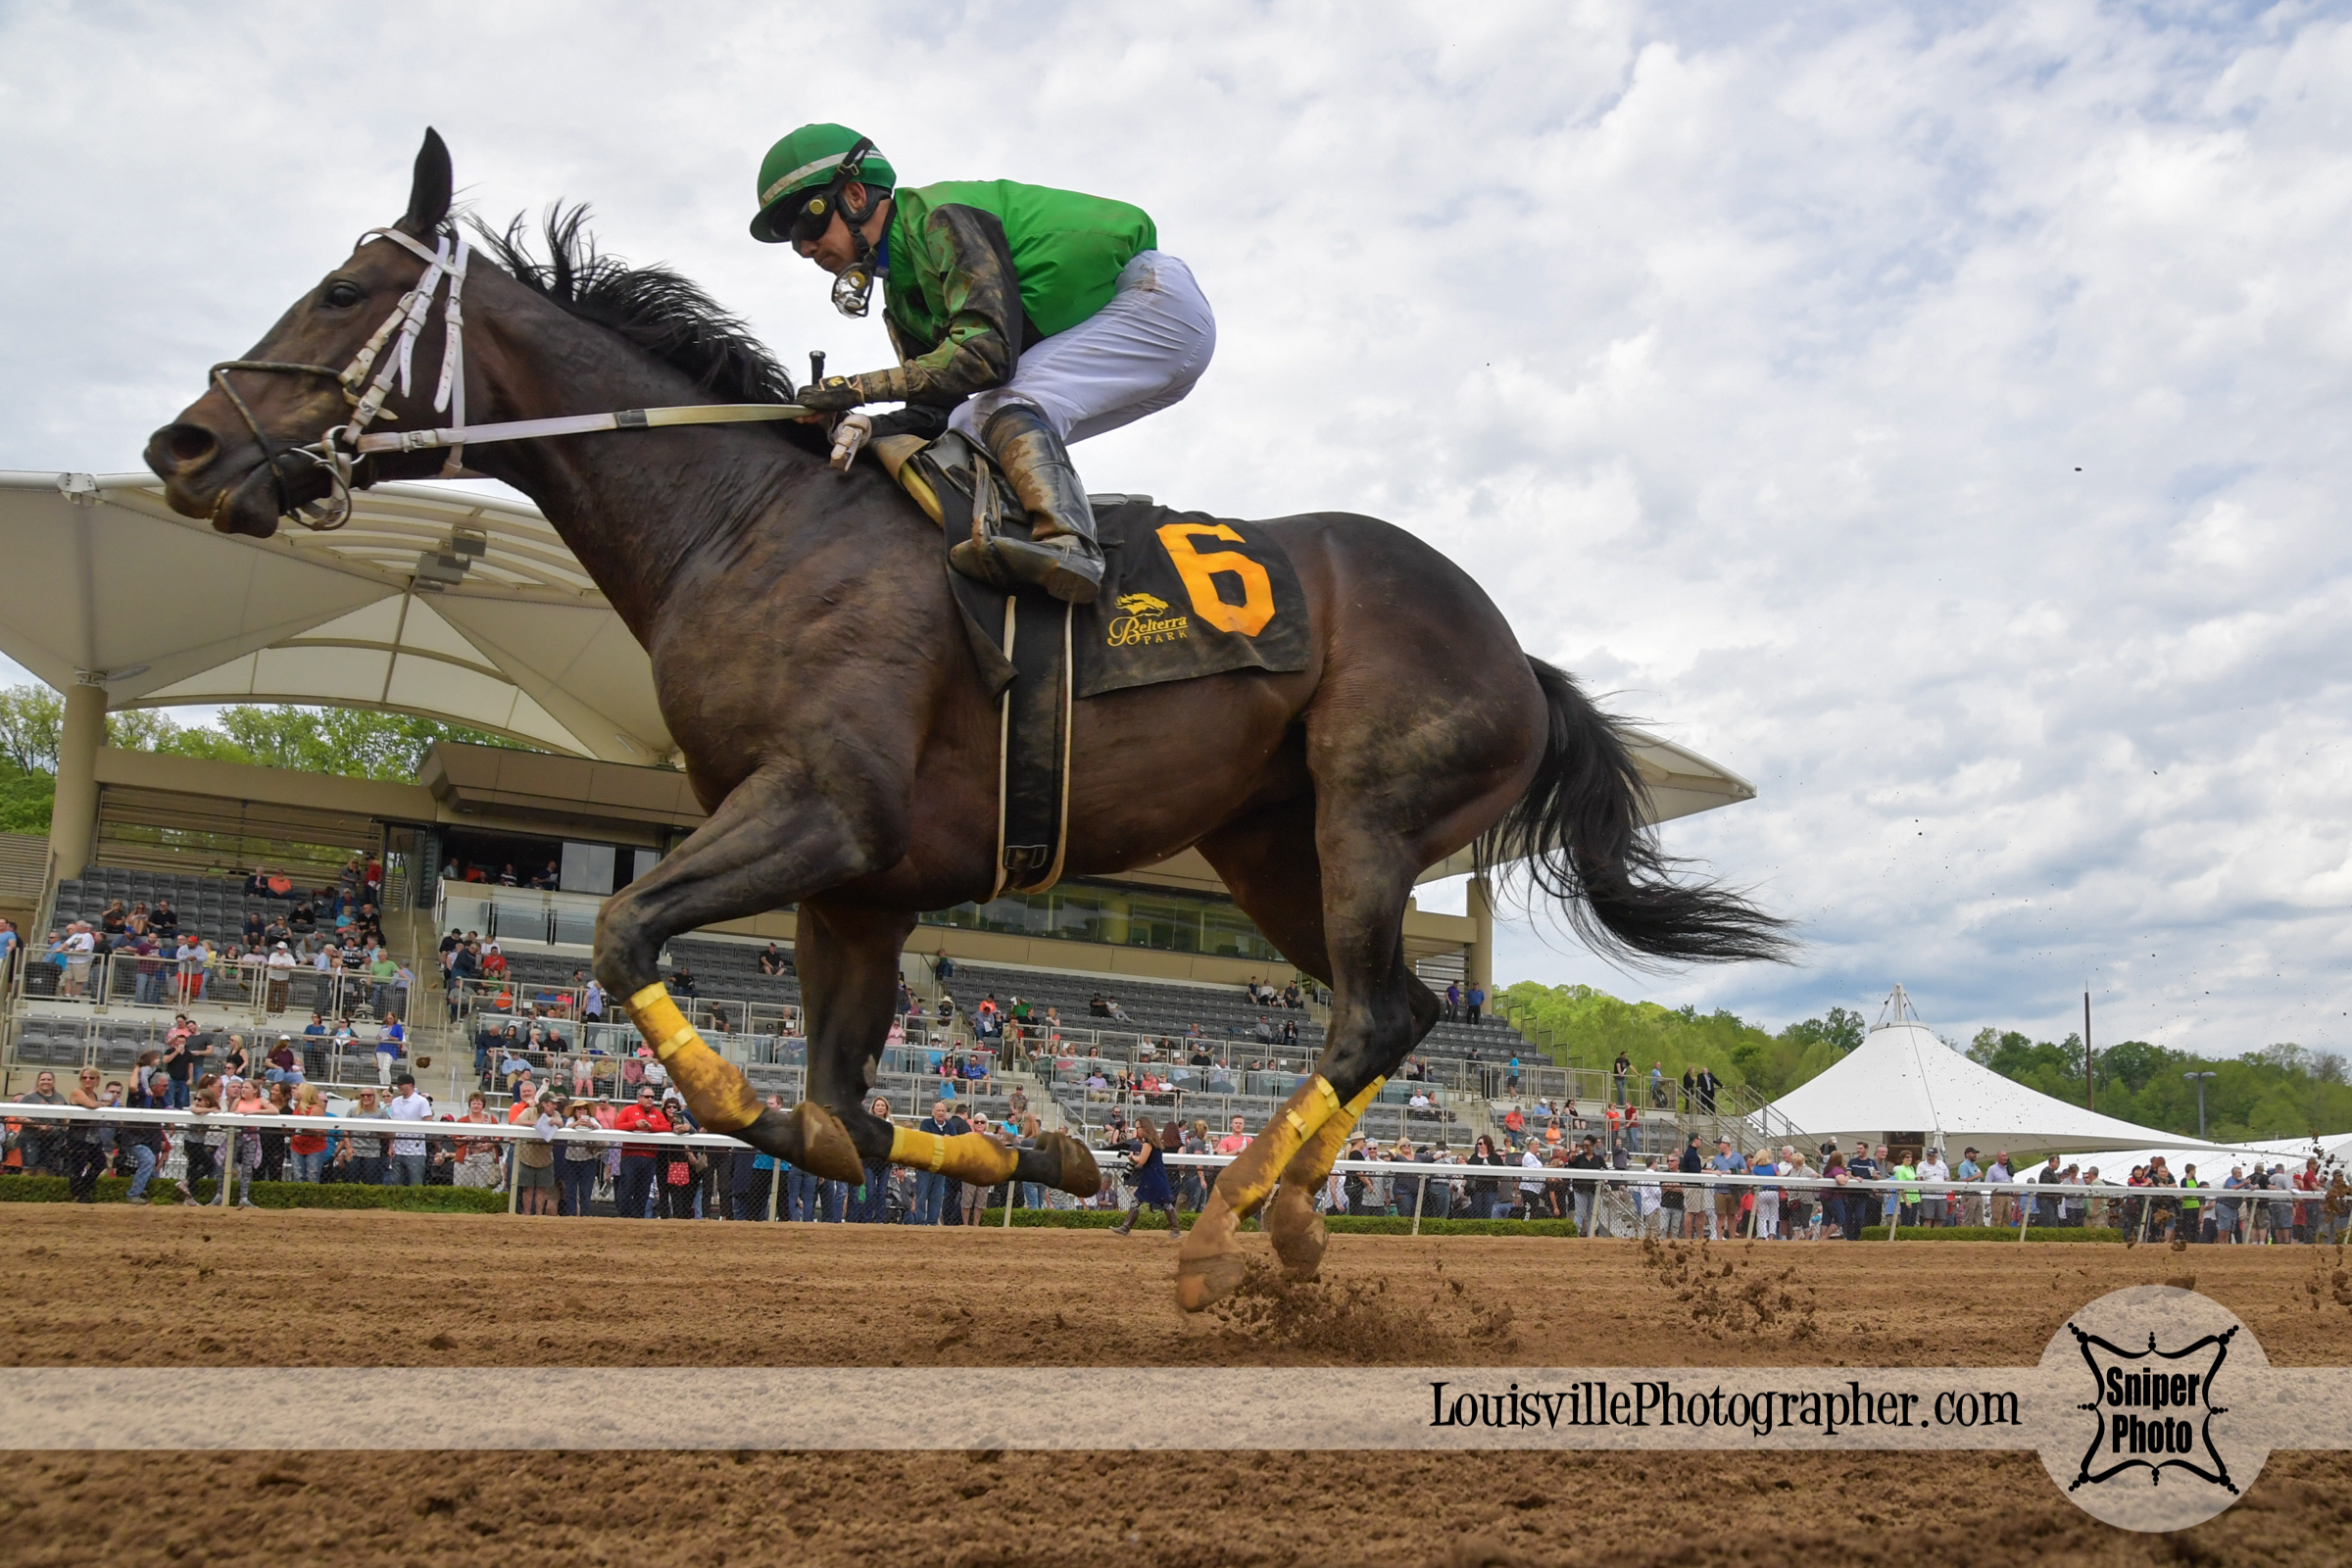 Belterra Park Archives - Page 2 of 2 - Louisville Photographer Blog